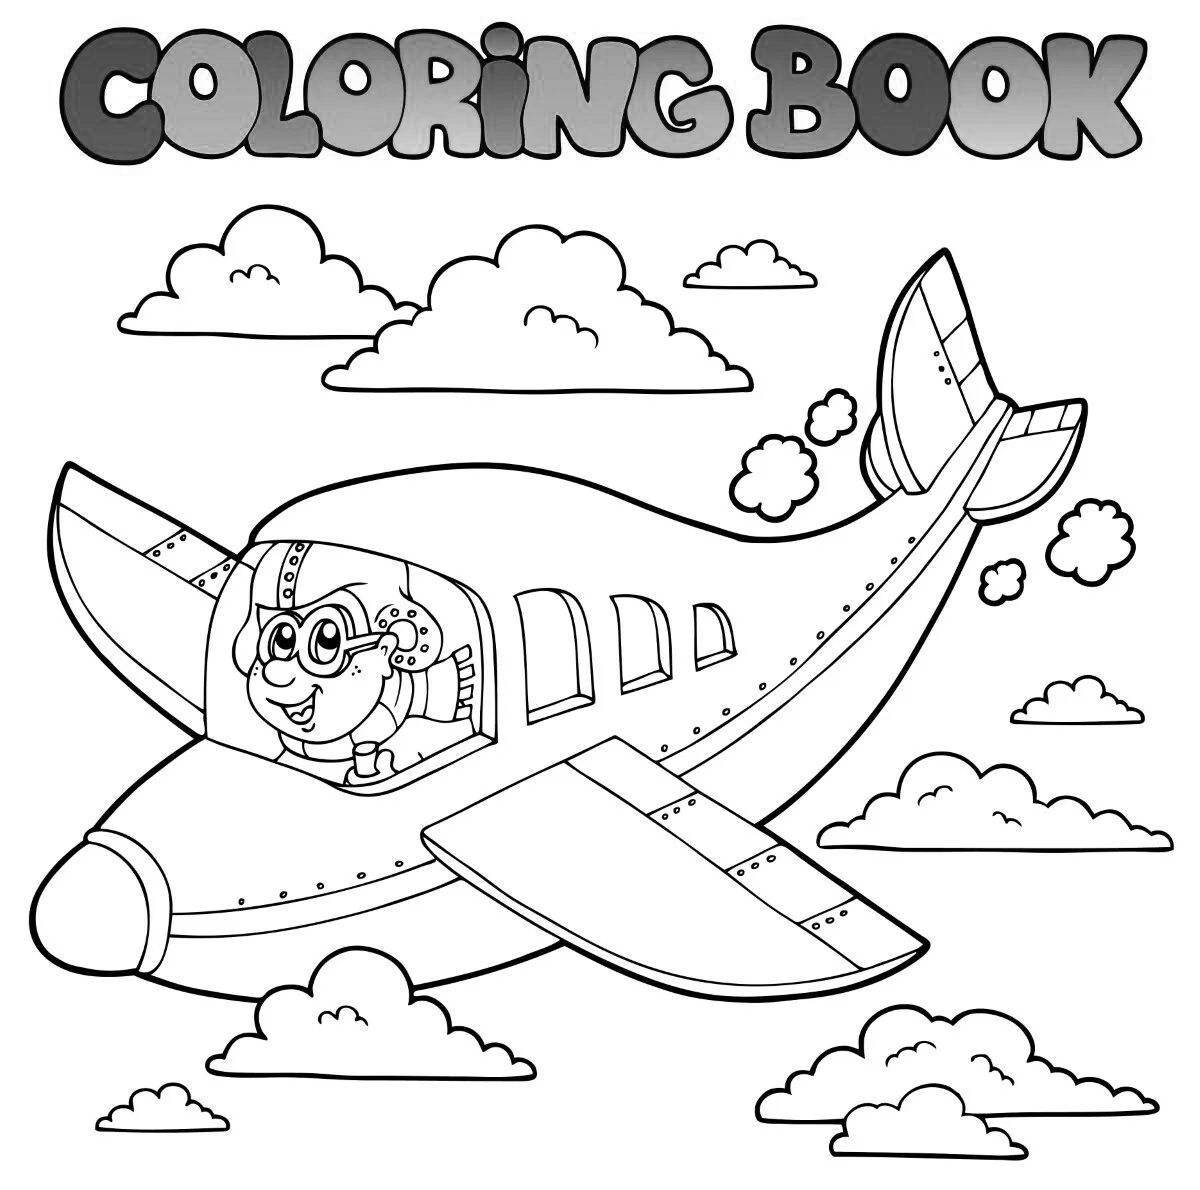 Colorful Pilot Coloring Page for Toddlers